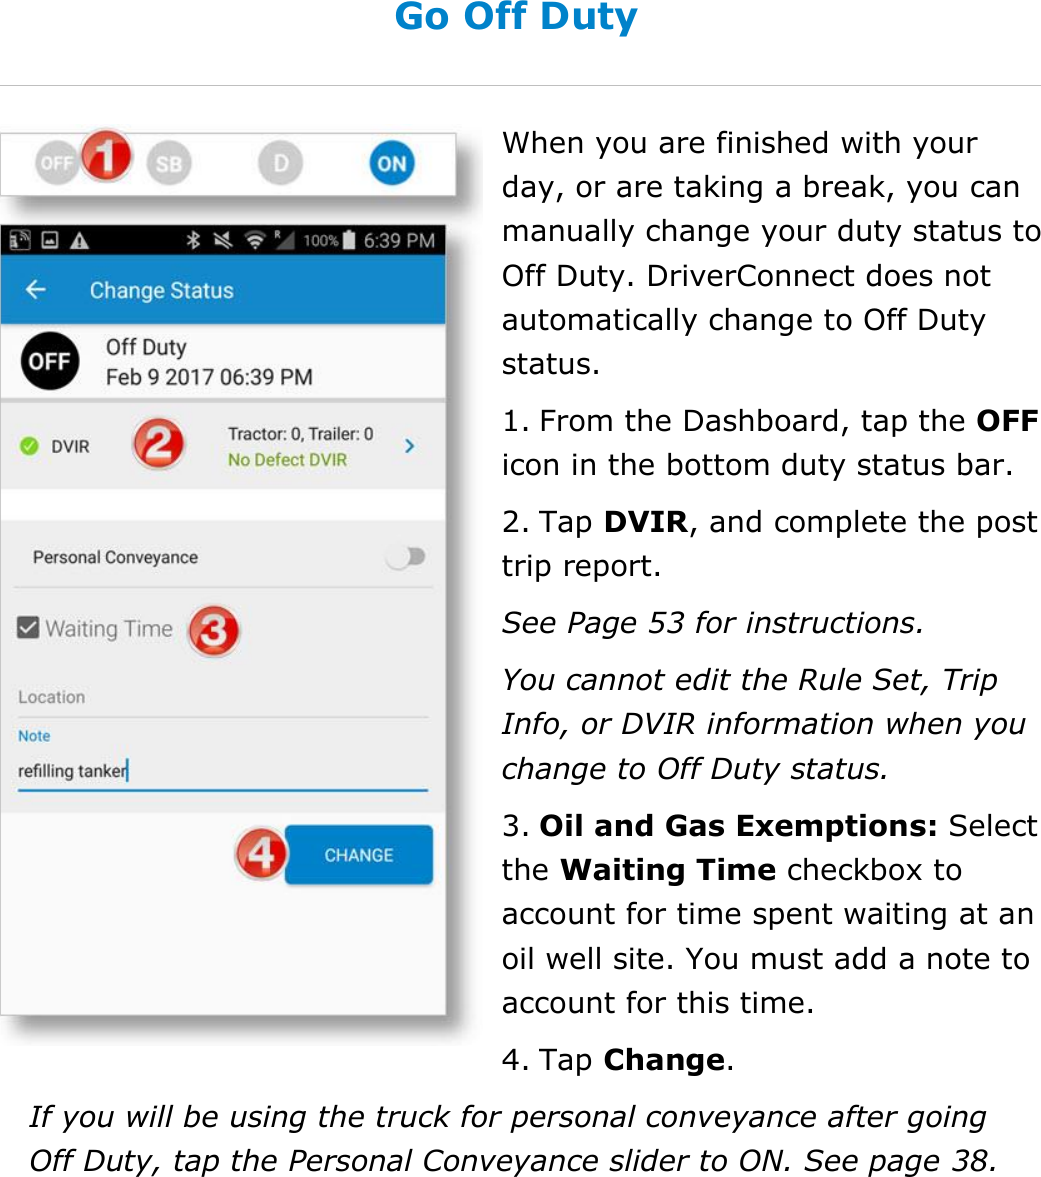 Set My Duty Status DriverConnect User Guide  35 © 2016-2017, Rand McNally, Inc. Go Off Duty When you are finished with your day, or are taking a break, you can manually change your duty status to Off Duty. DriverConnect does not automatically change to Off Duty status. 1. From the Dashboard, tap the OFF icon in the bottom duty status bar. 2. Tap DVIR, and complete the post trip report. See Page 53 for instructions. You cannot edit the Rule Set, Trip Info, or DVIR information when you change to Off Duty status. 3. Oil and Gas Exemptions: Select the Waiting Time checkbox to account for time spent waiting at an oil well site. You must add a note to account for this time. 4. Tap Change. If you will be using the truck for personal conveyance after going Off Duty, tap the Personal Conveyance slider to ON. See page 38.   